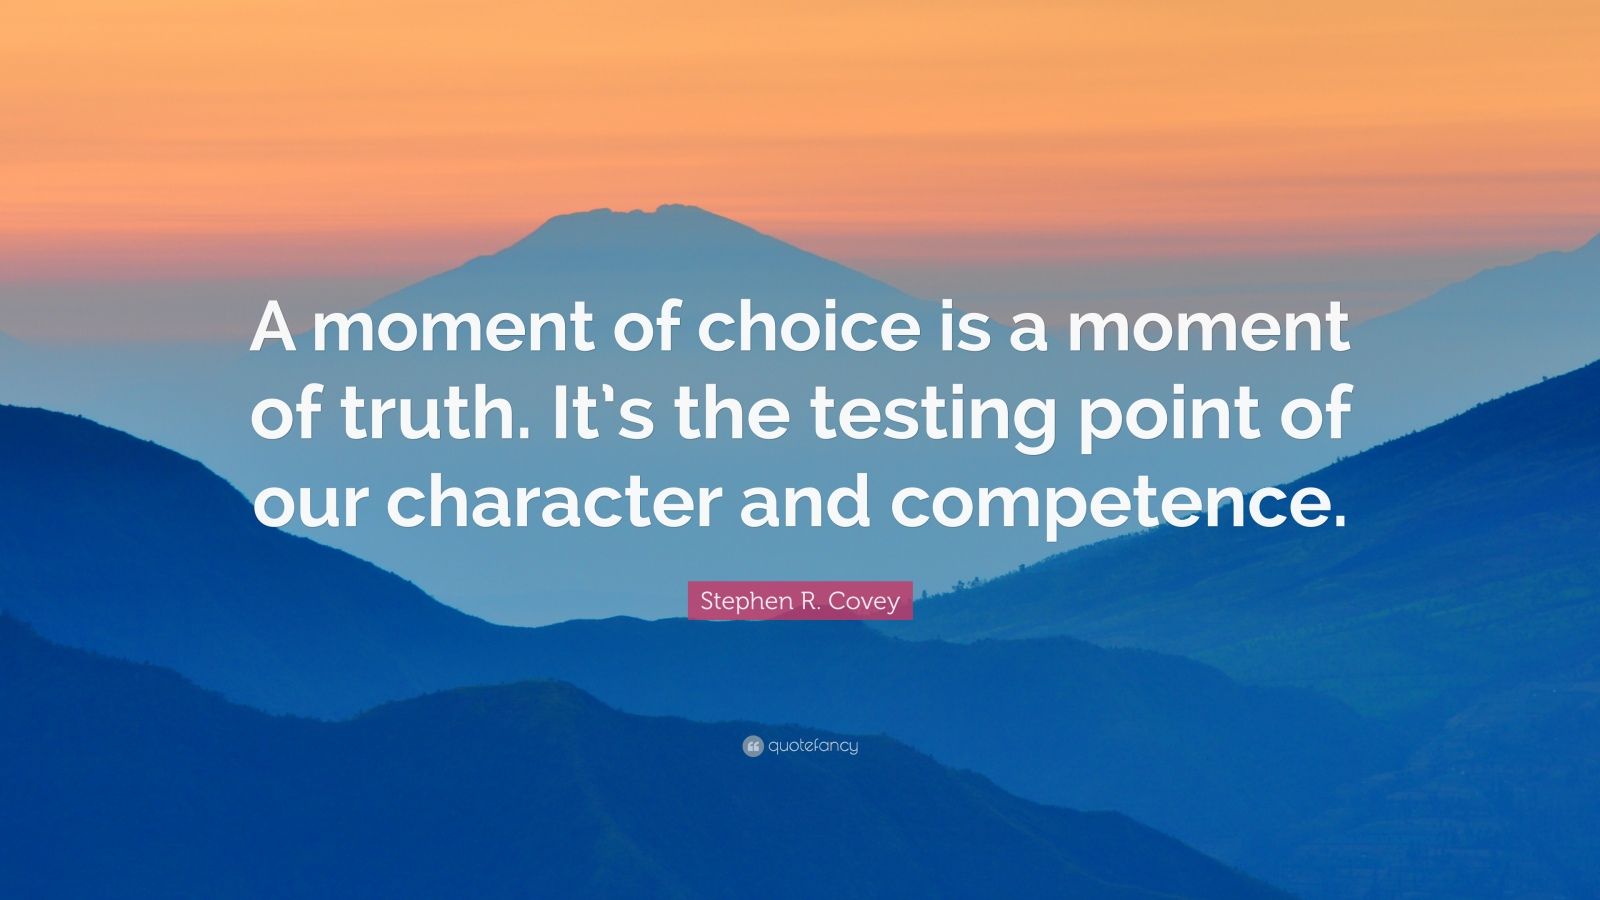 Stephen R. Covey Quote: “A moment of choice is a moment of truth. It’s